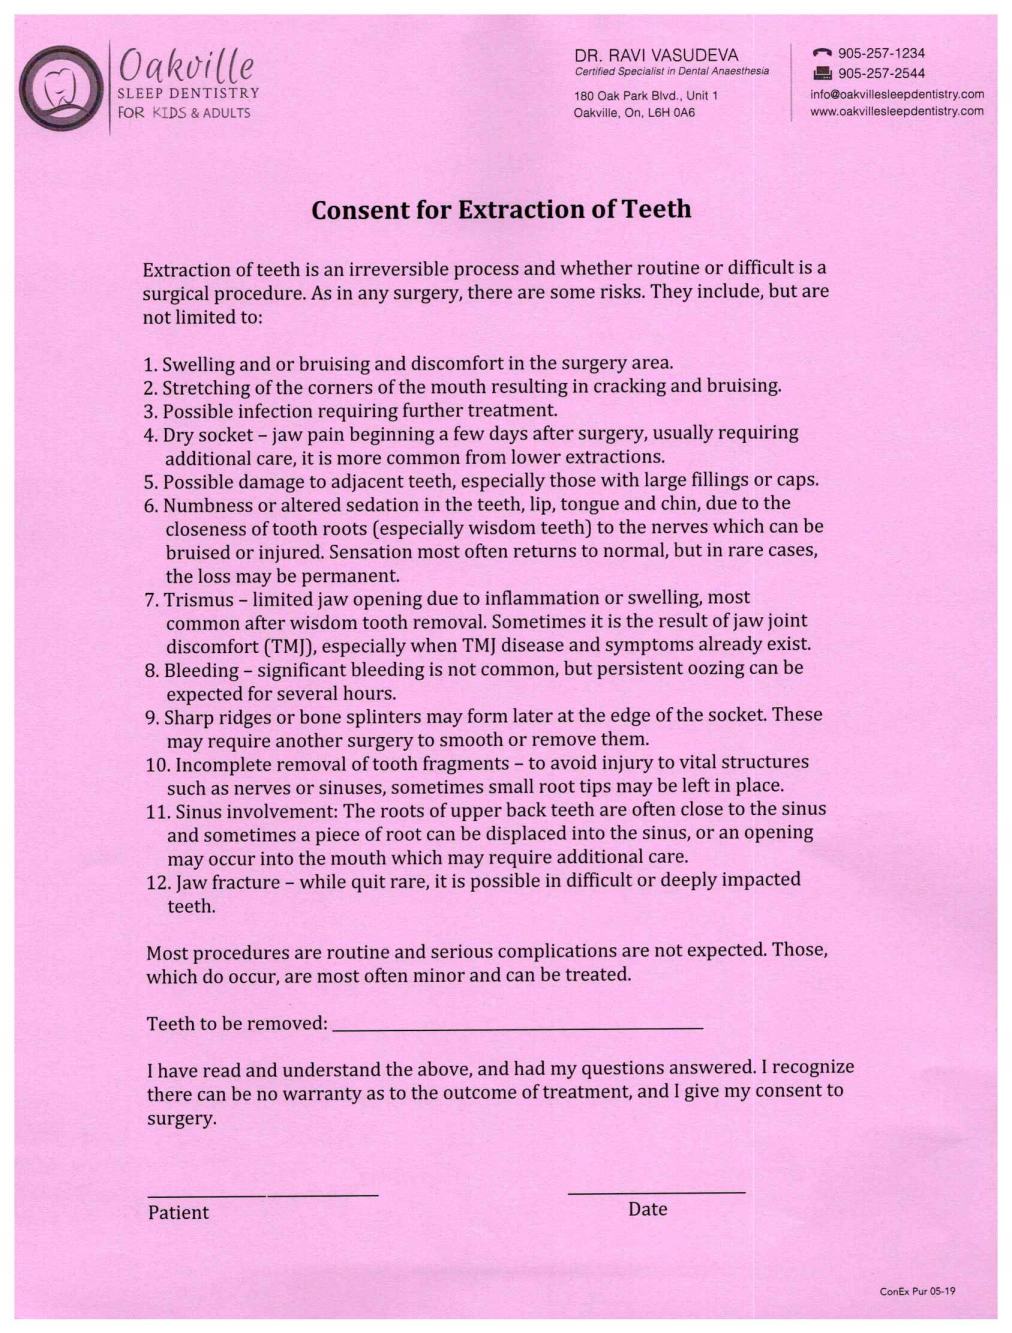 Consent for Extraction of Teeth Form